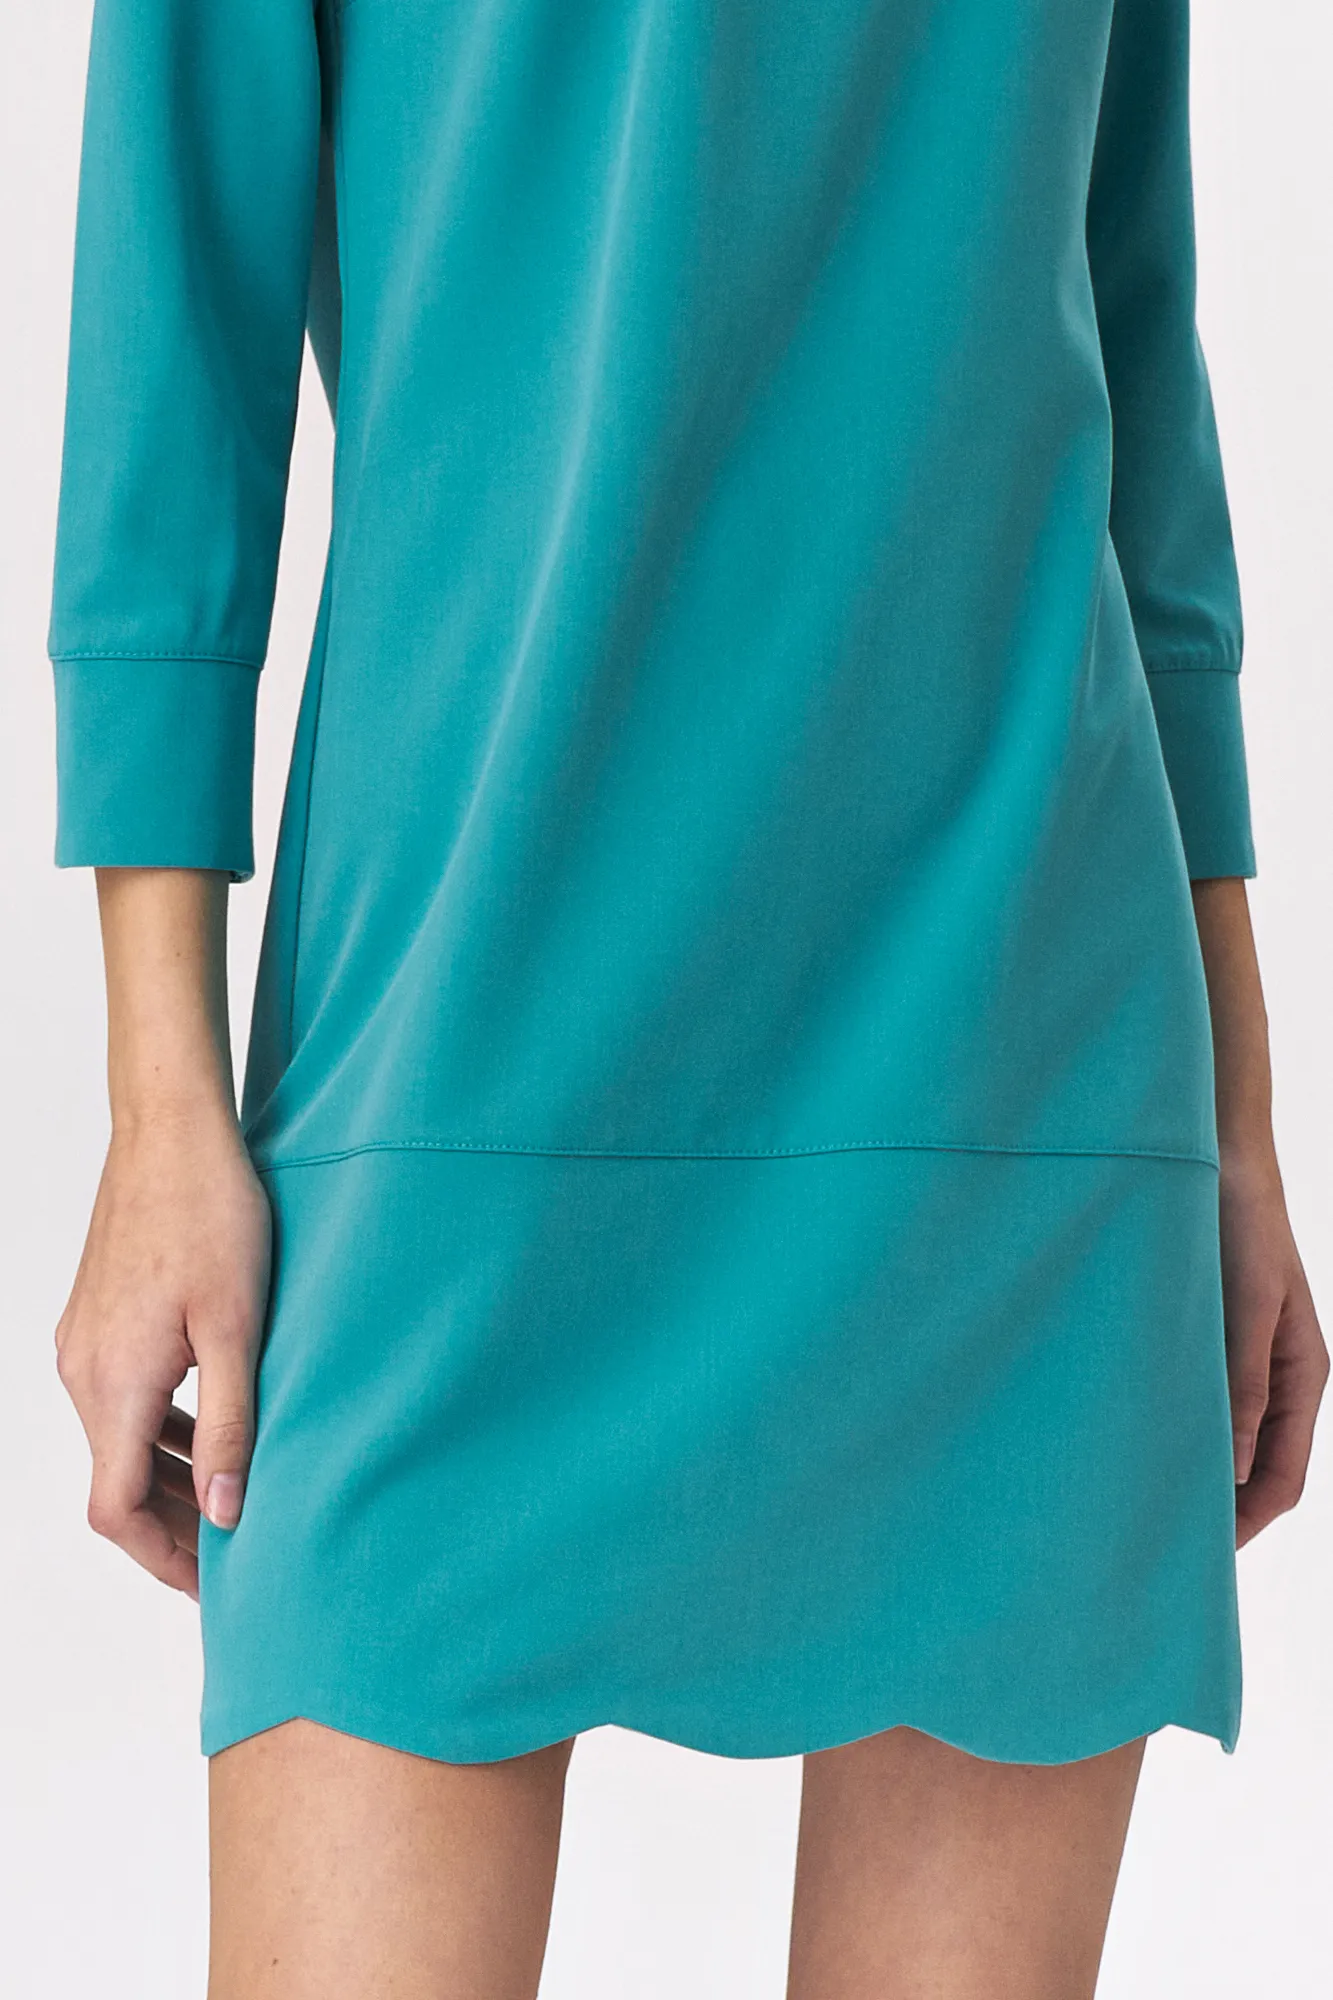 pantoffel sofa ongeduldig Turquoise dress with a neckline at the back - Nife